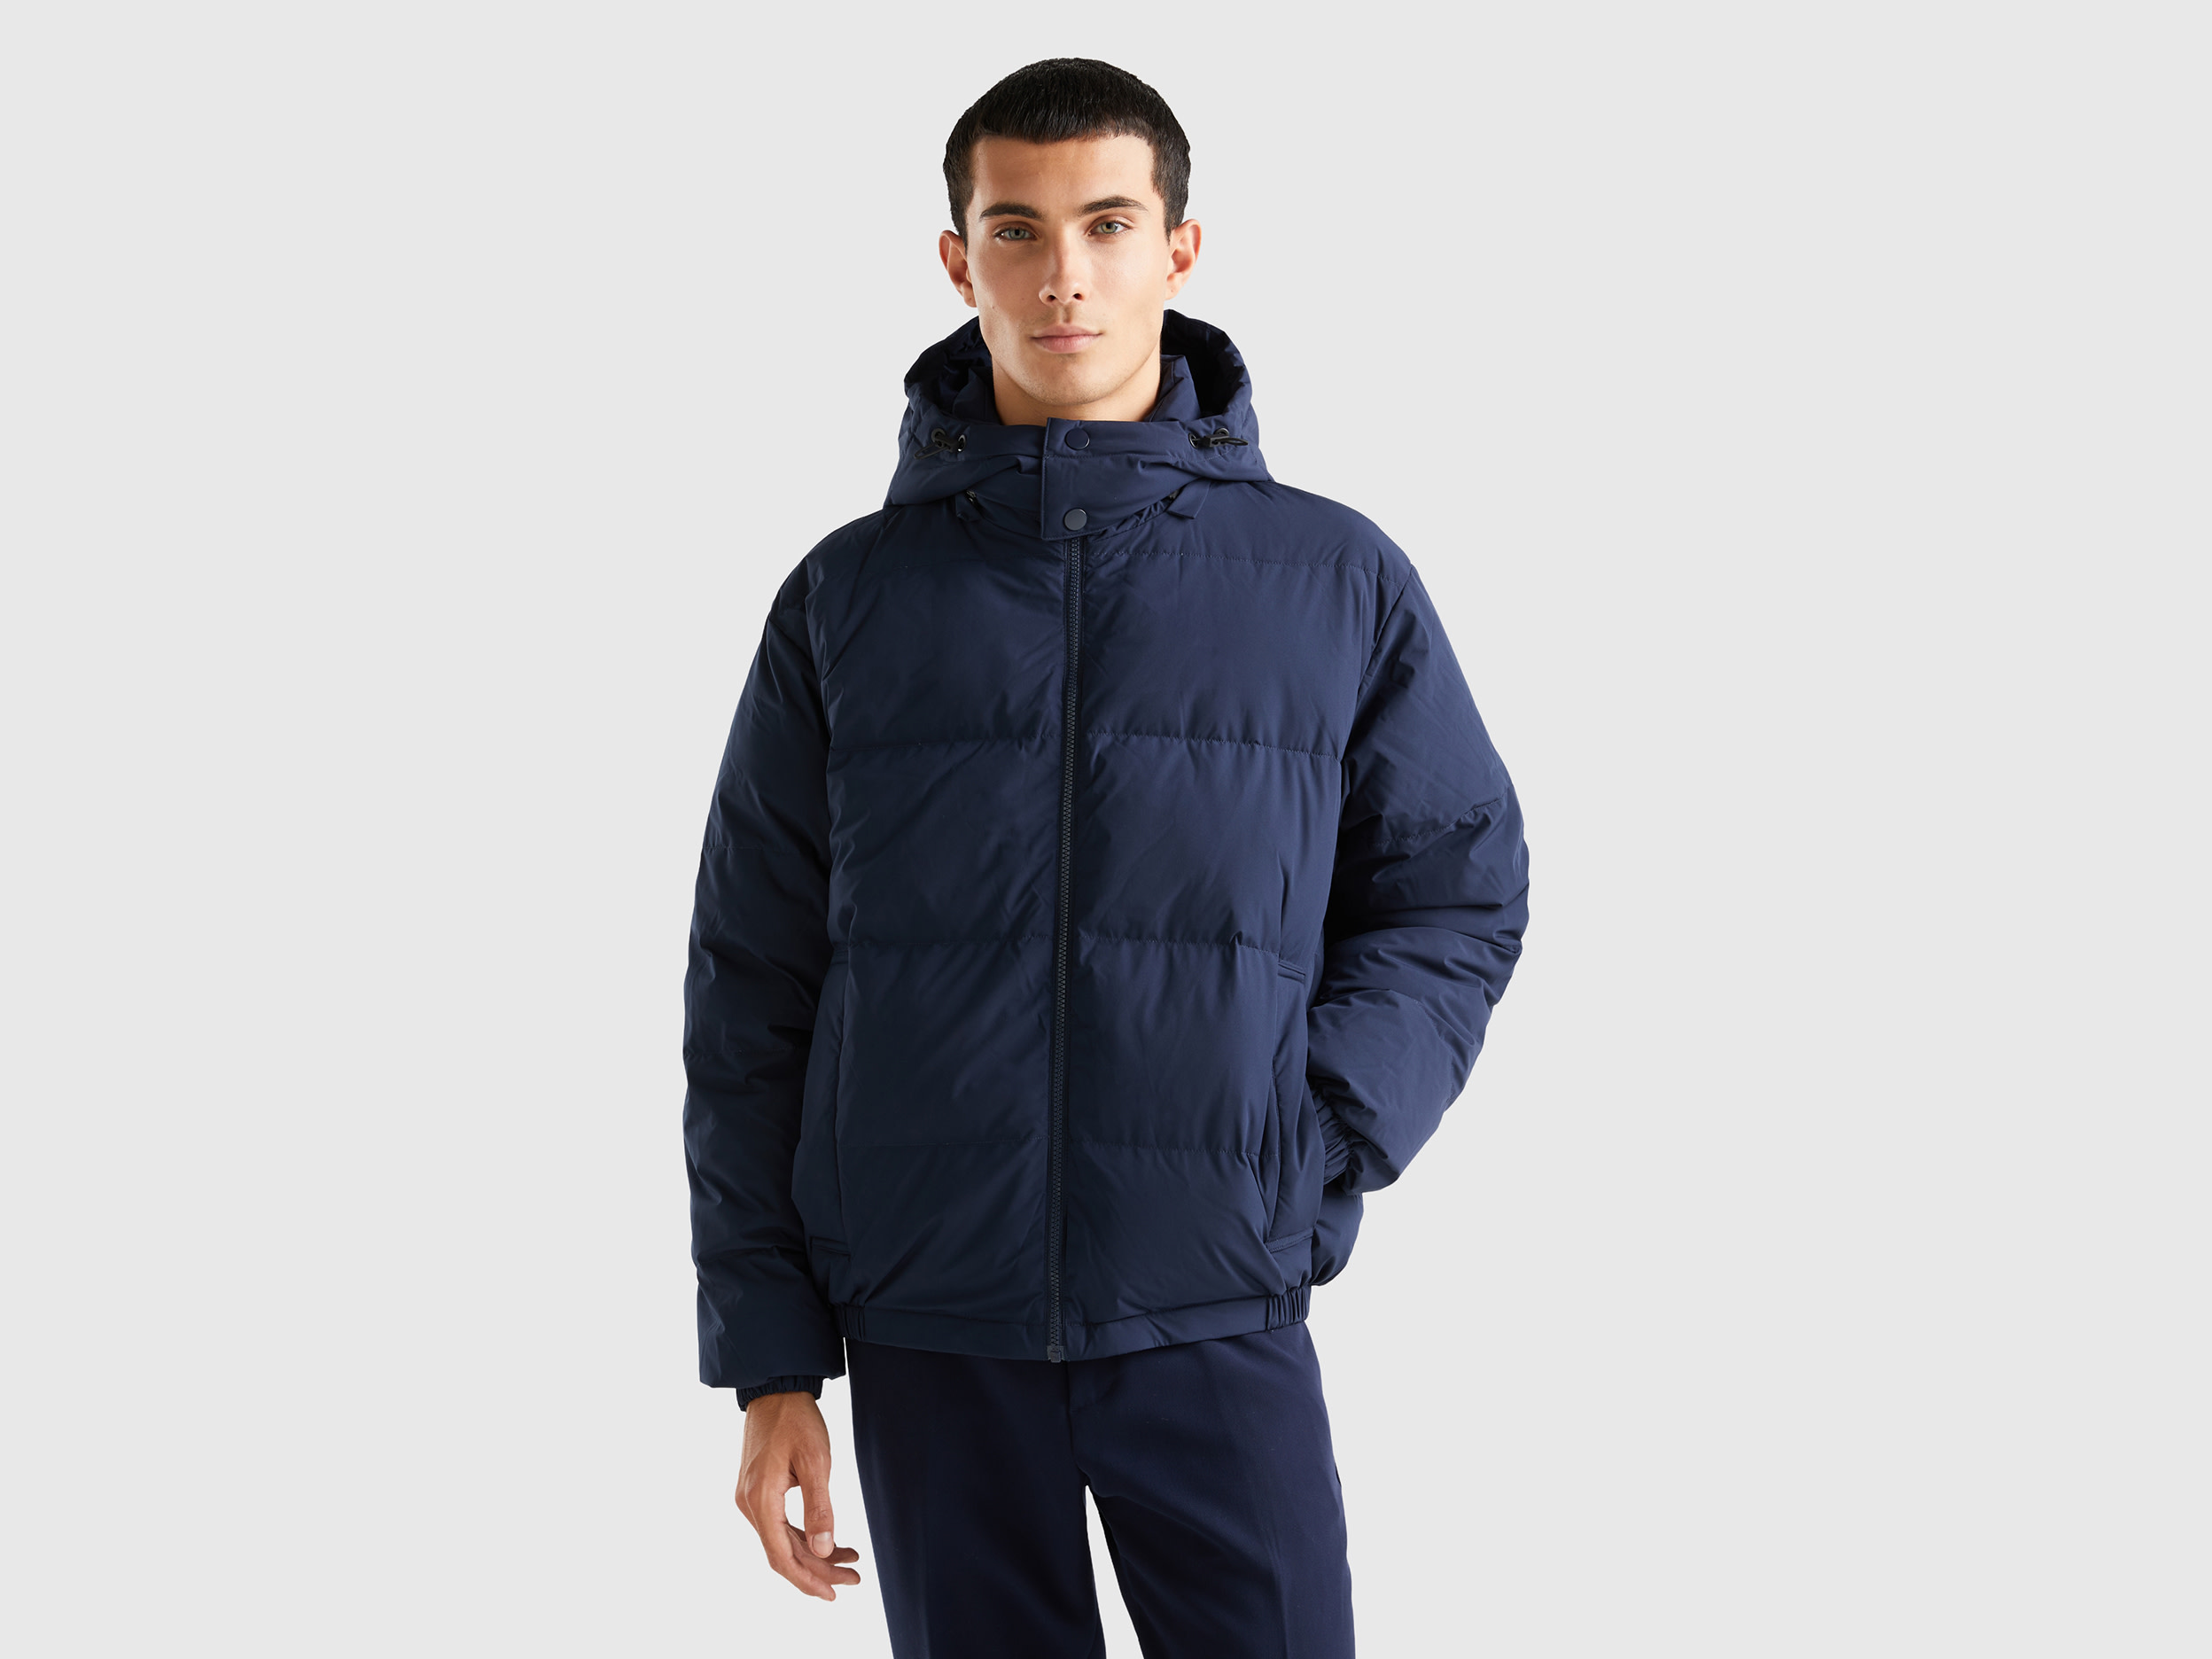 Benetton, Padded Jacket With Removable Hood, size XXL, Dark Blue, Men